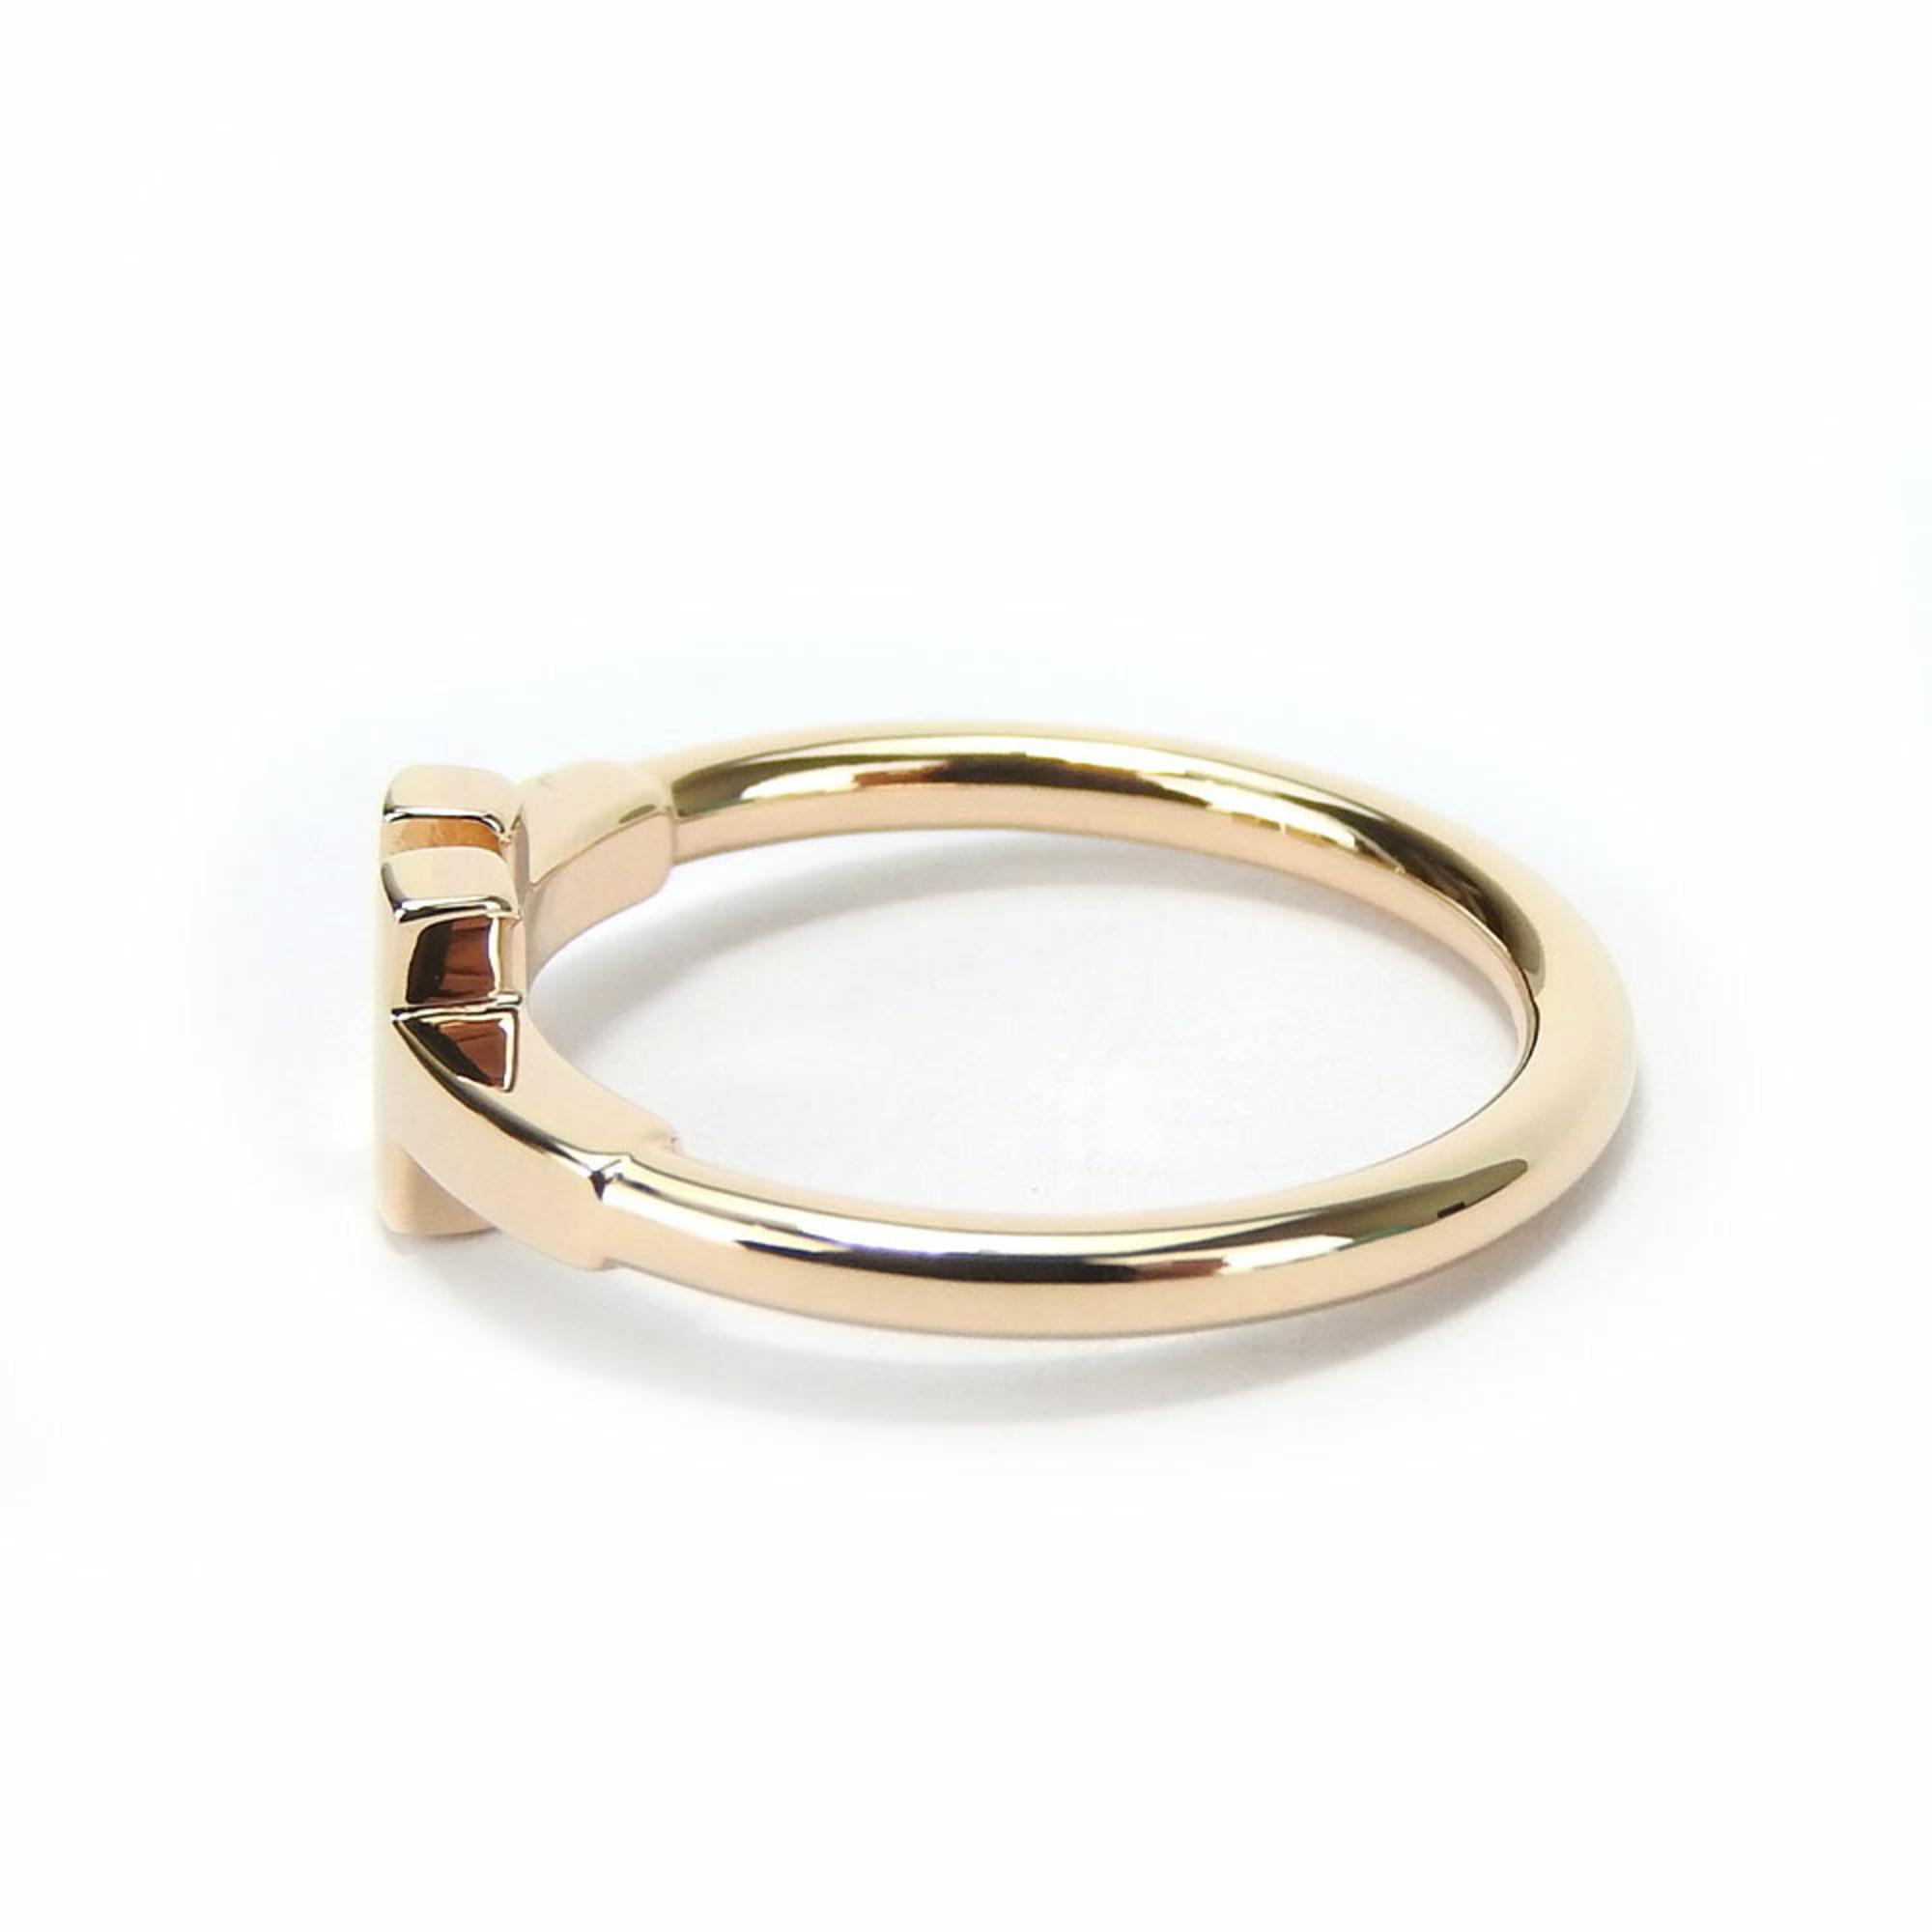 Tiffany Ring, T-Wire, K18PG, approx. 3.0g, Pink Gold, Women's, TIFFANY&Co.